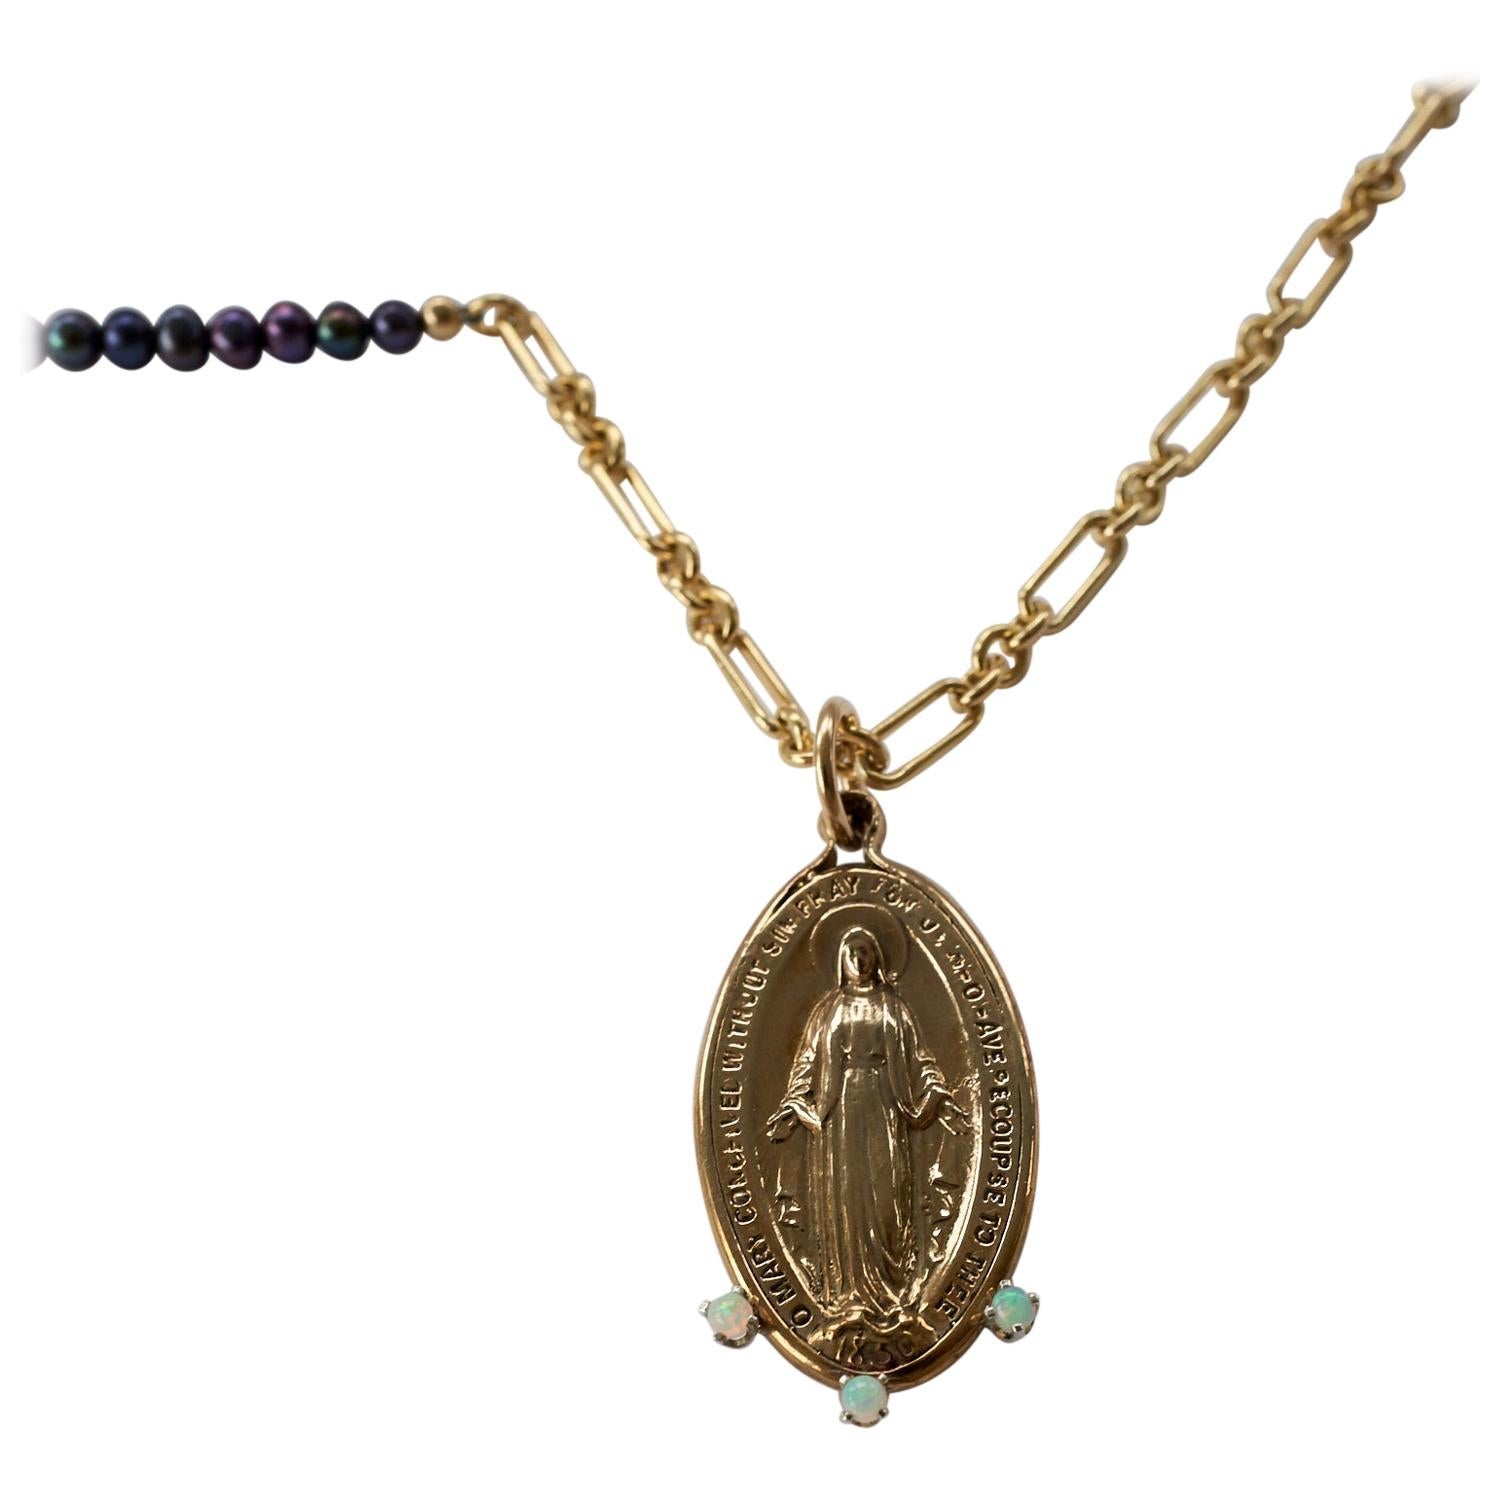 Medal Necklace Chain Virgin Mary Black Pearl Long Chain J dauphin For Sale